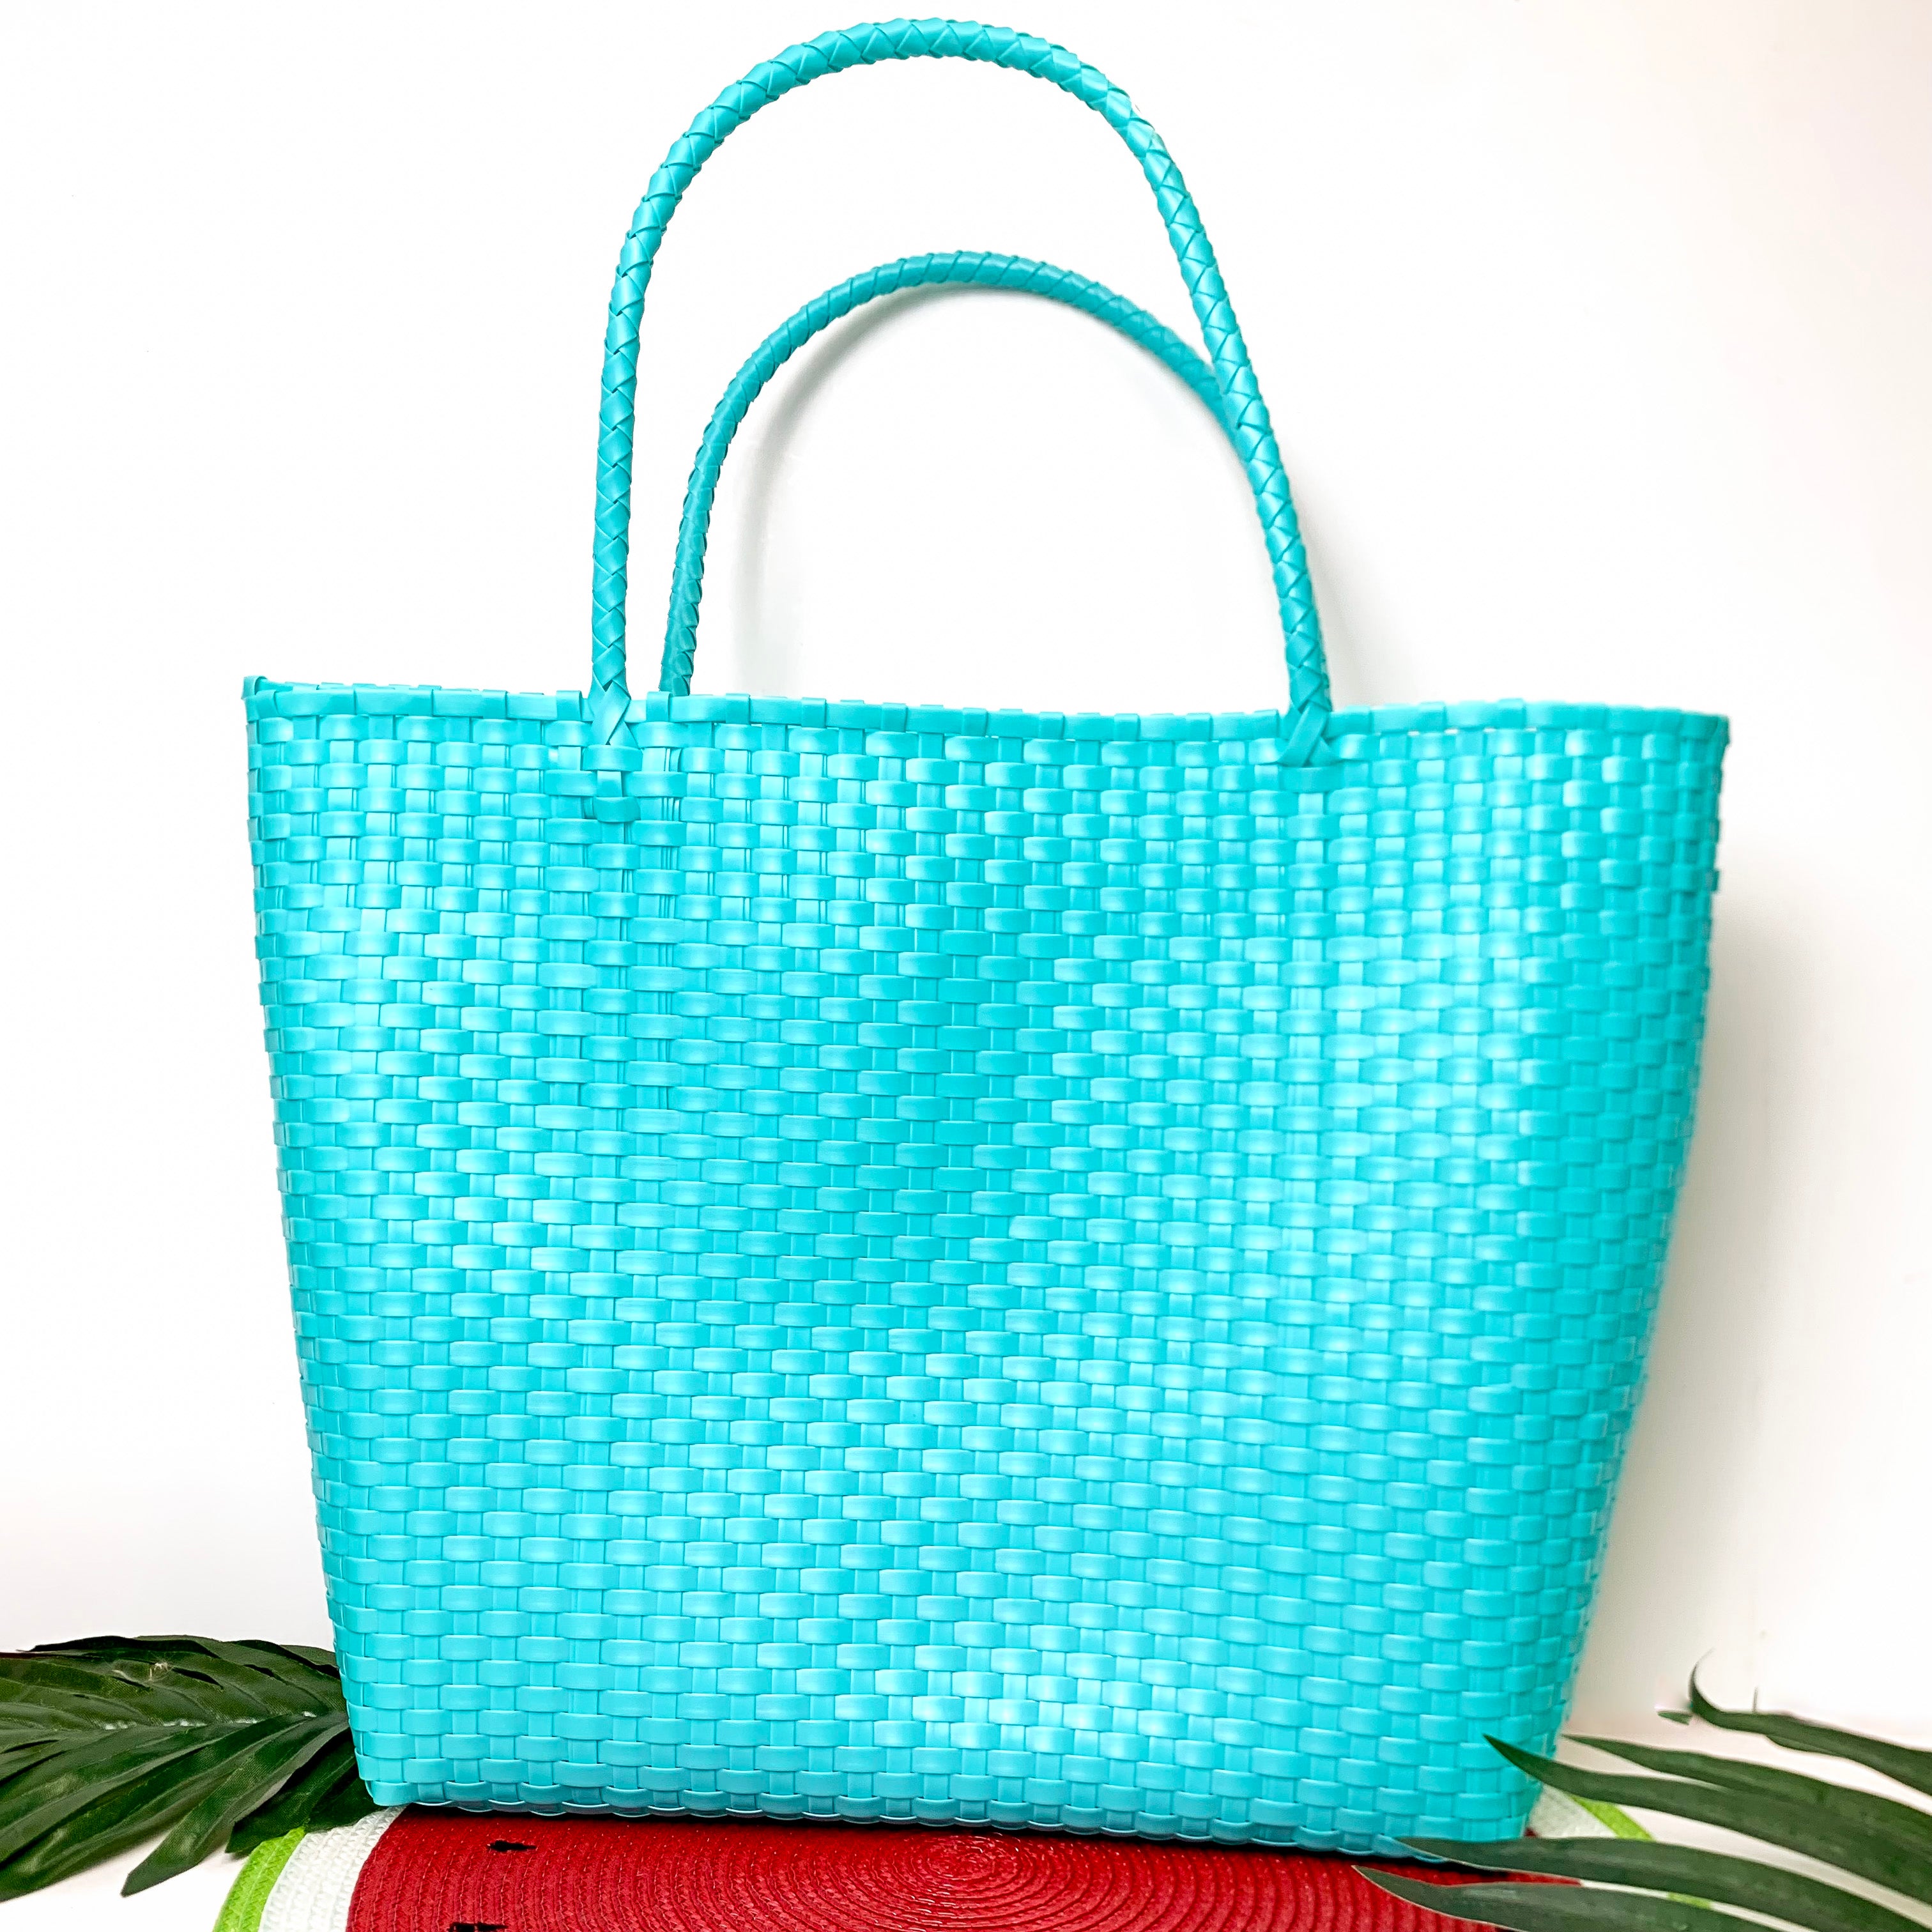 Coastal Couture Carryall Tote Bag in Turquoise Blue